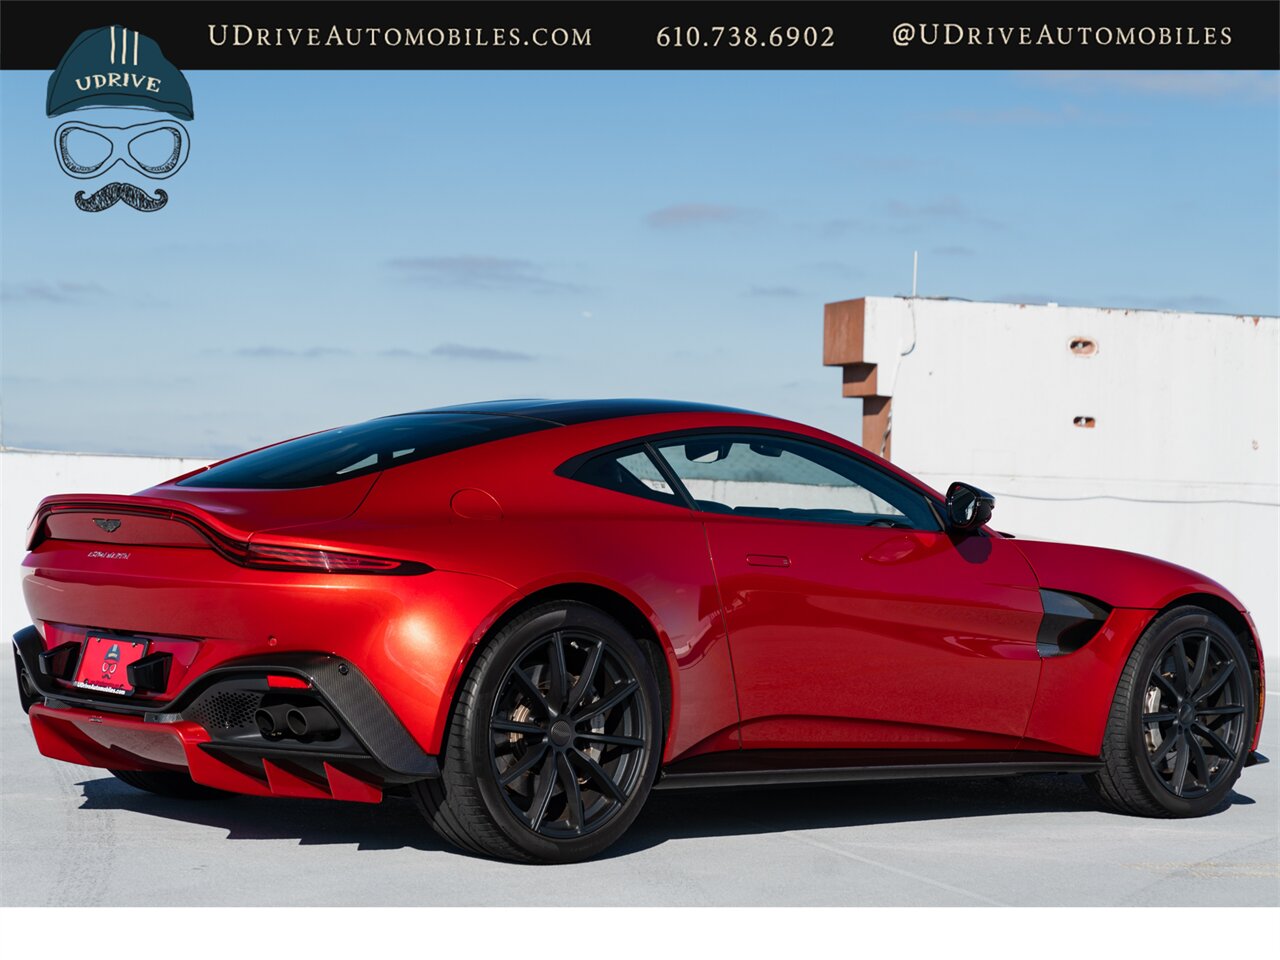 2019 Aston Martin Vantage  Incredibly Spec Rare Q Exclusive Fiamma Red $222k MSRP 1 of a Kind CPO - Photo 22 - West Chester, PA 19382